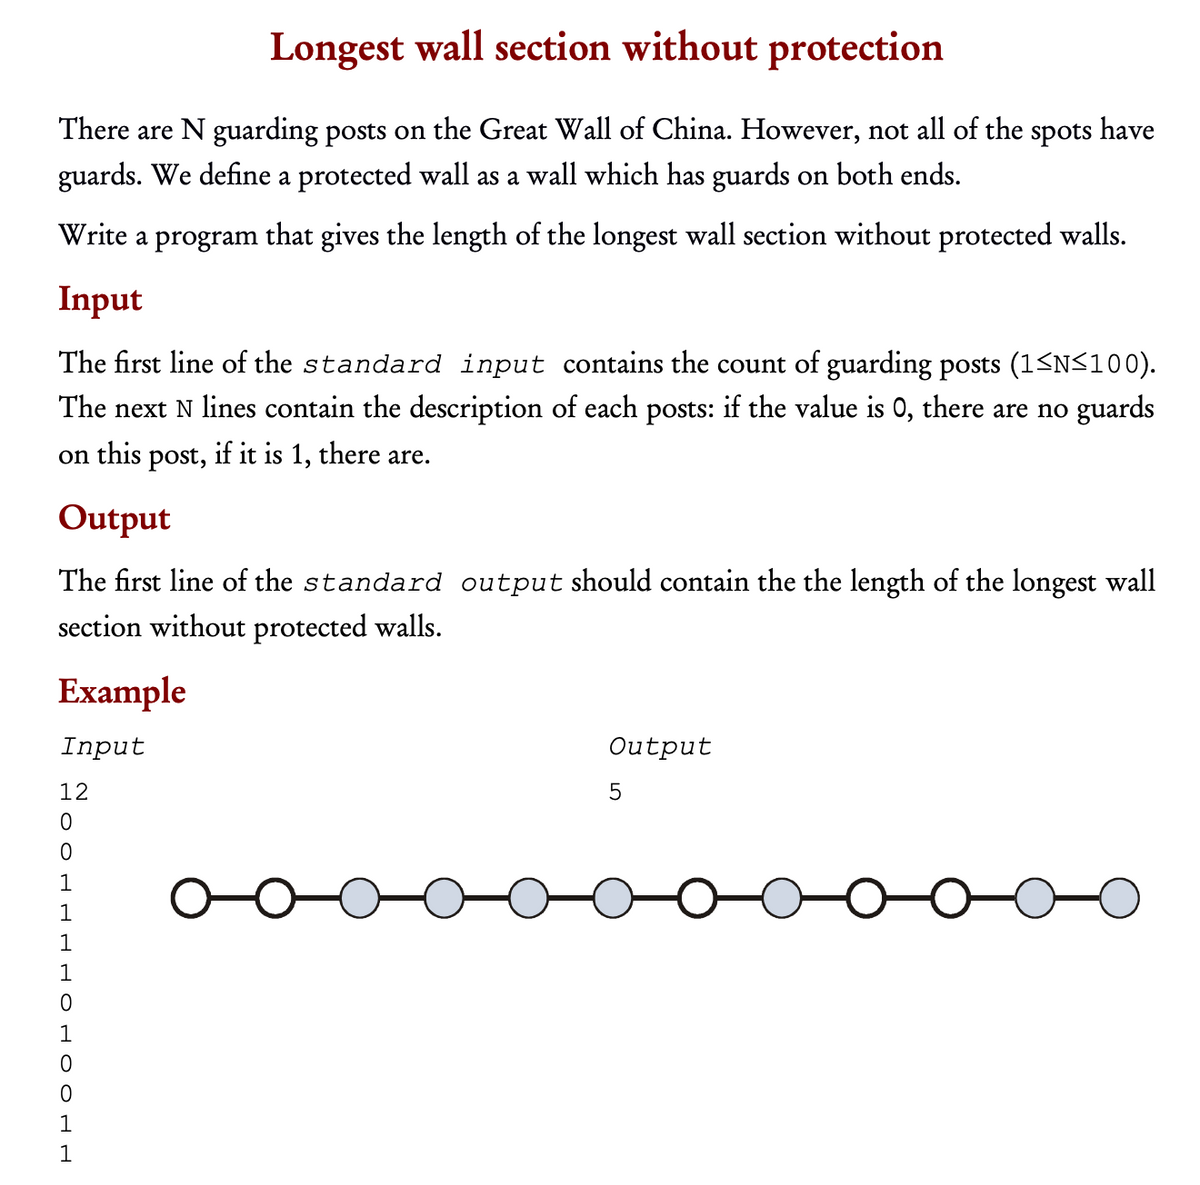 Longest wall section without protection
There are N guarding posts on the Great Wall of China. However, not all of the spots have
guards. We define a protected wall as a wall which has guards on both ends.
Write a program that gives the length of the longest wall section without protected walls.
Input
The first line of the standard input contains the count of guarding posts (1≤N≤100).
The next N lines contain the description of each posts: if the value is 0, there are no guards
on this post, if it is 1, there are.
Output
The first line of the standard output should contain the the length of the longest wall
section without protected walls.
Example
Input
12
0
1
1
1
1
0
HOOHH
1
1
1
Output
5